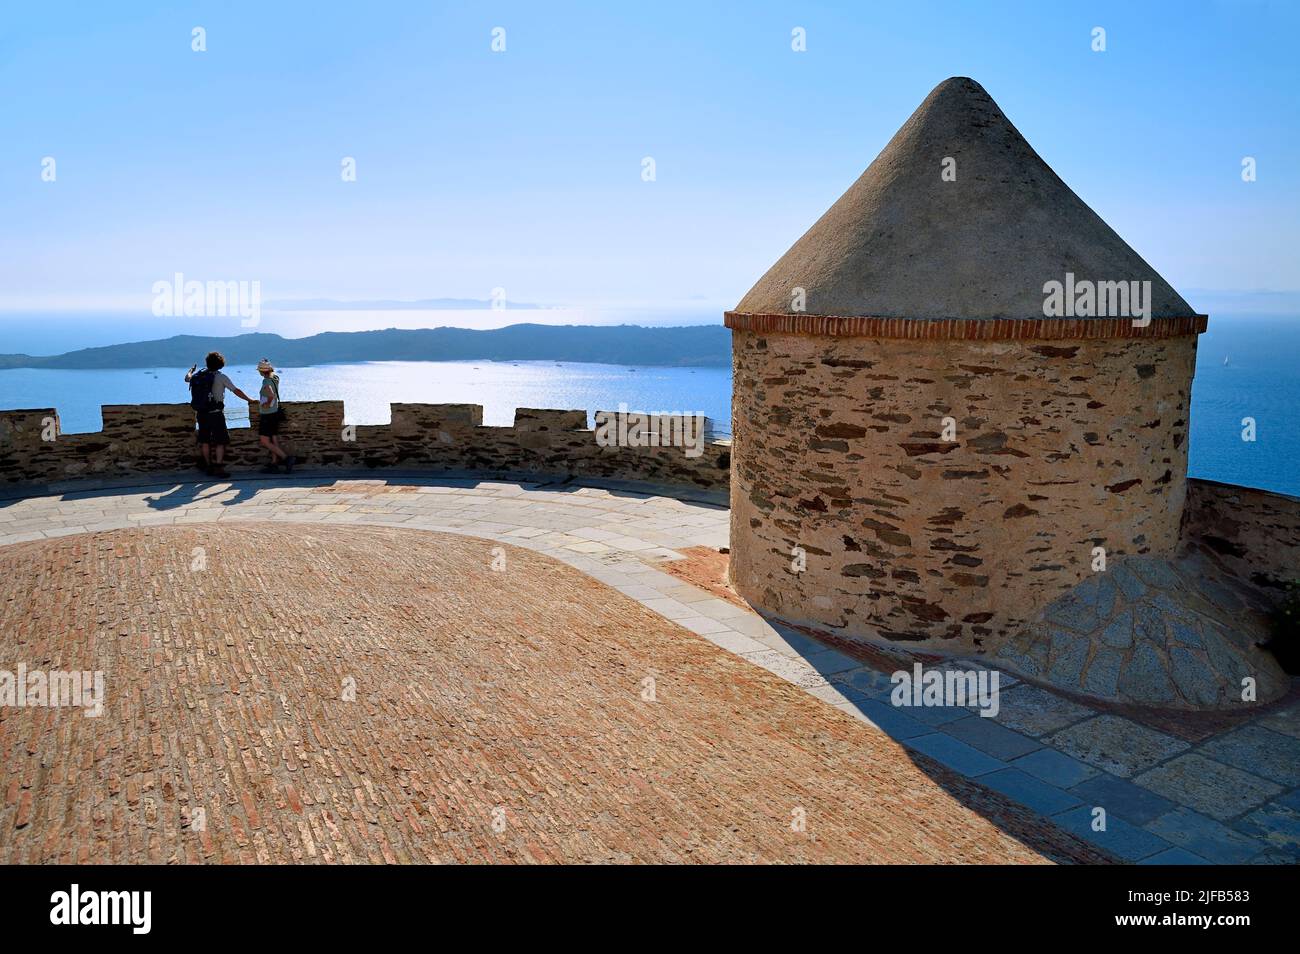 France, Var, Iles d'Hyeres, Parc National de Port Cros (National park of Port  Cros), Port-Cros island, Fort de l'Estissac overlooking the harbour of Port  Cros and the Bagaud Island which is an